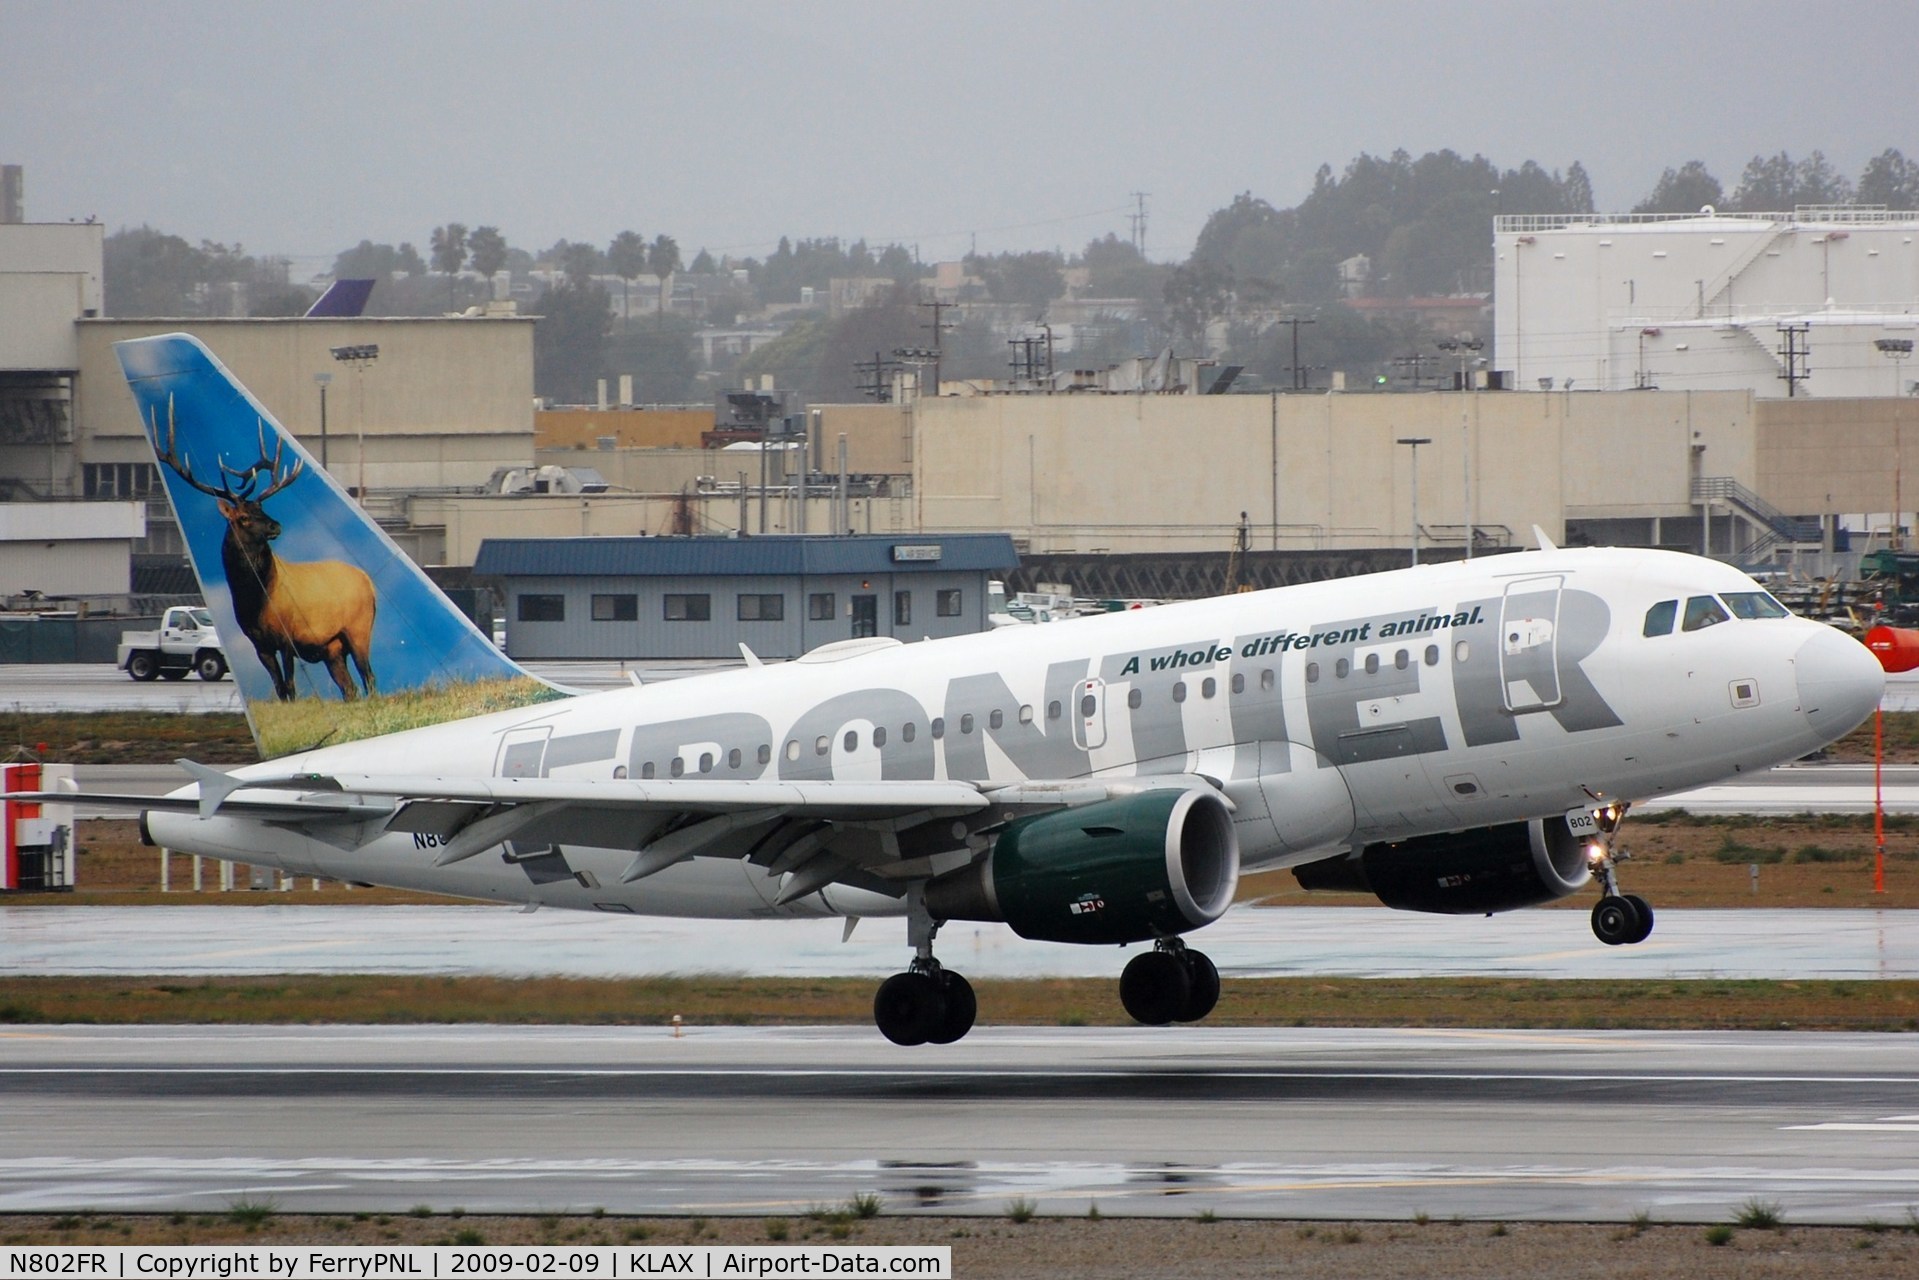 N802FR, 2003 Airbus A318-111 C/N 1991, Frontier A318 landing in LAX. Airframe scrapped